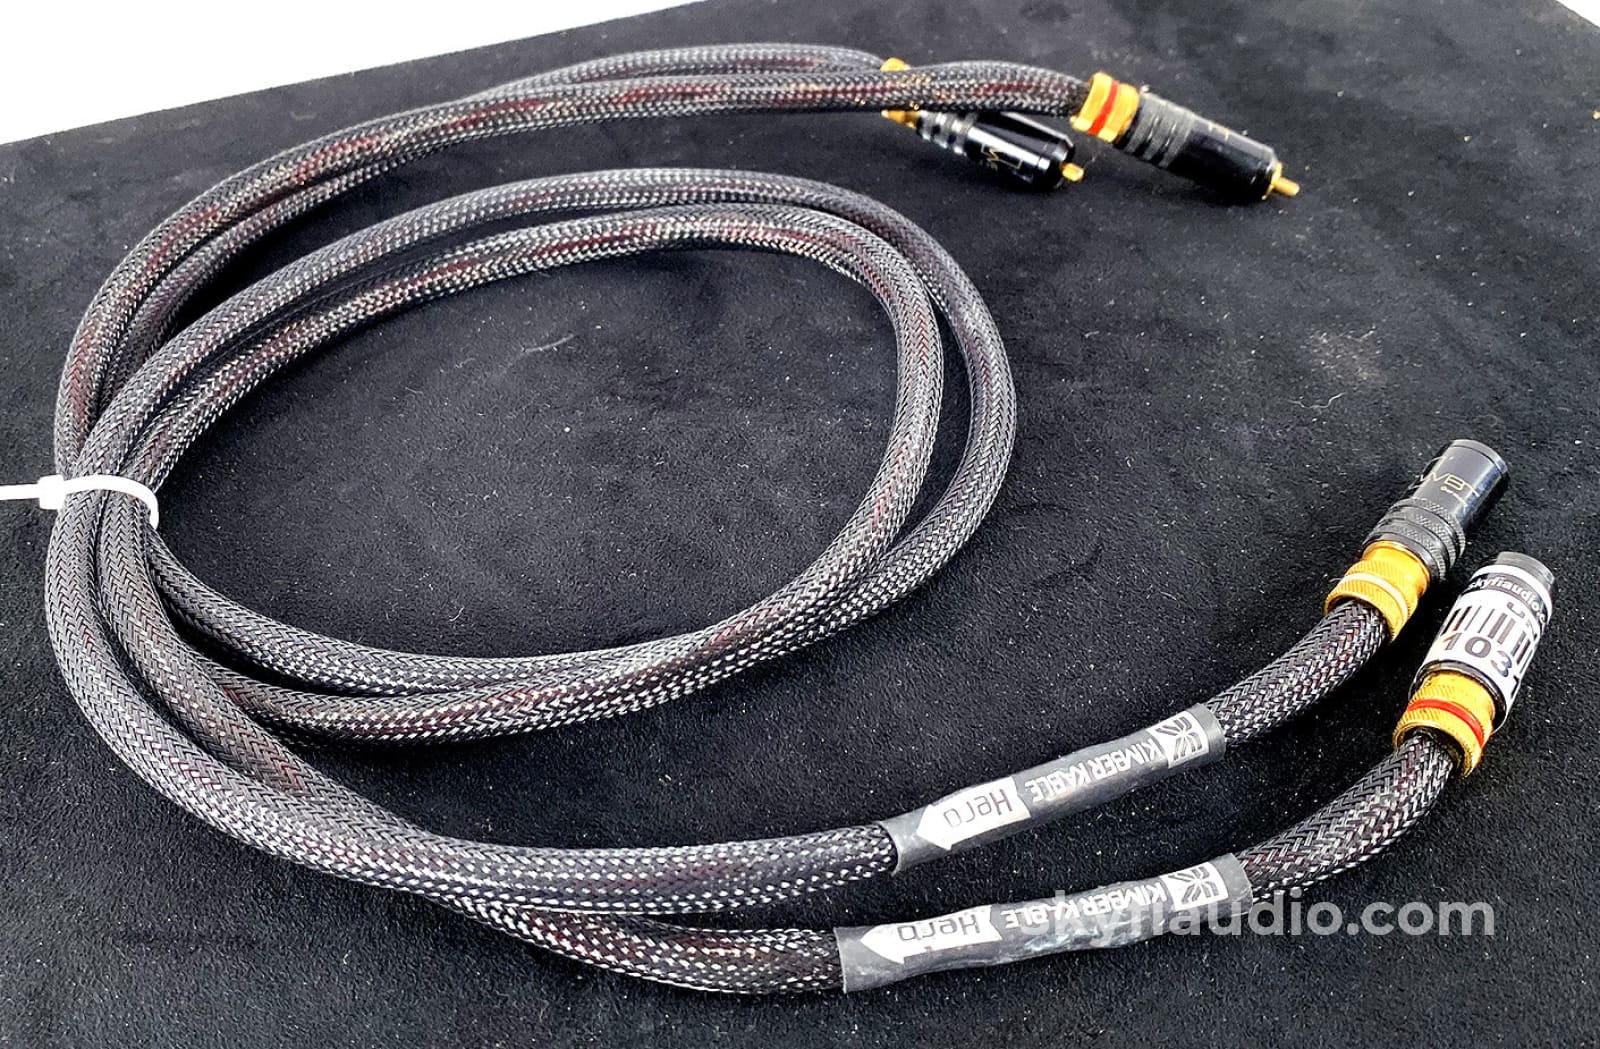 Kimber Kable Ascent Series Hero Rca Interconnect - 1M Cables